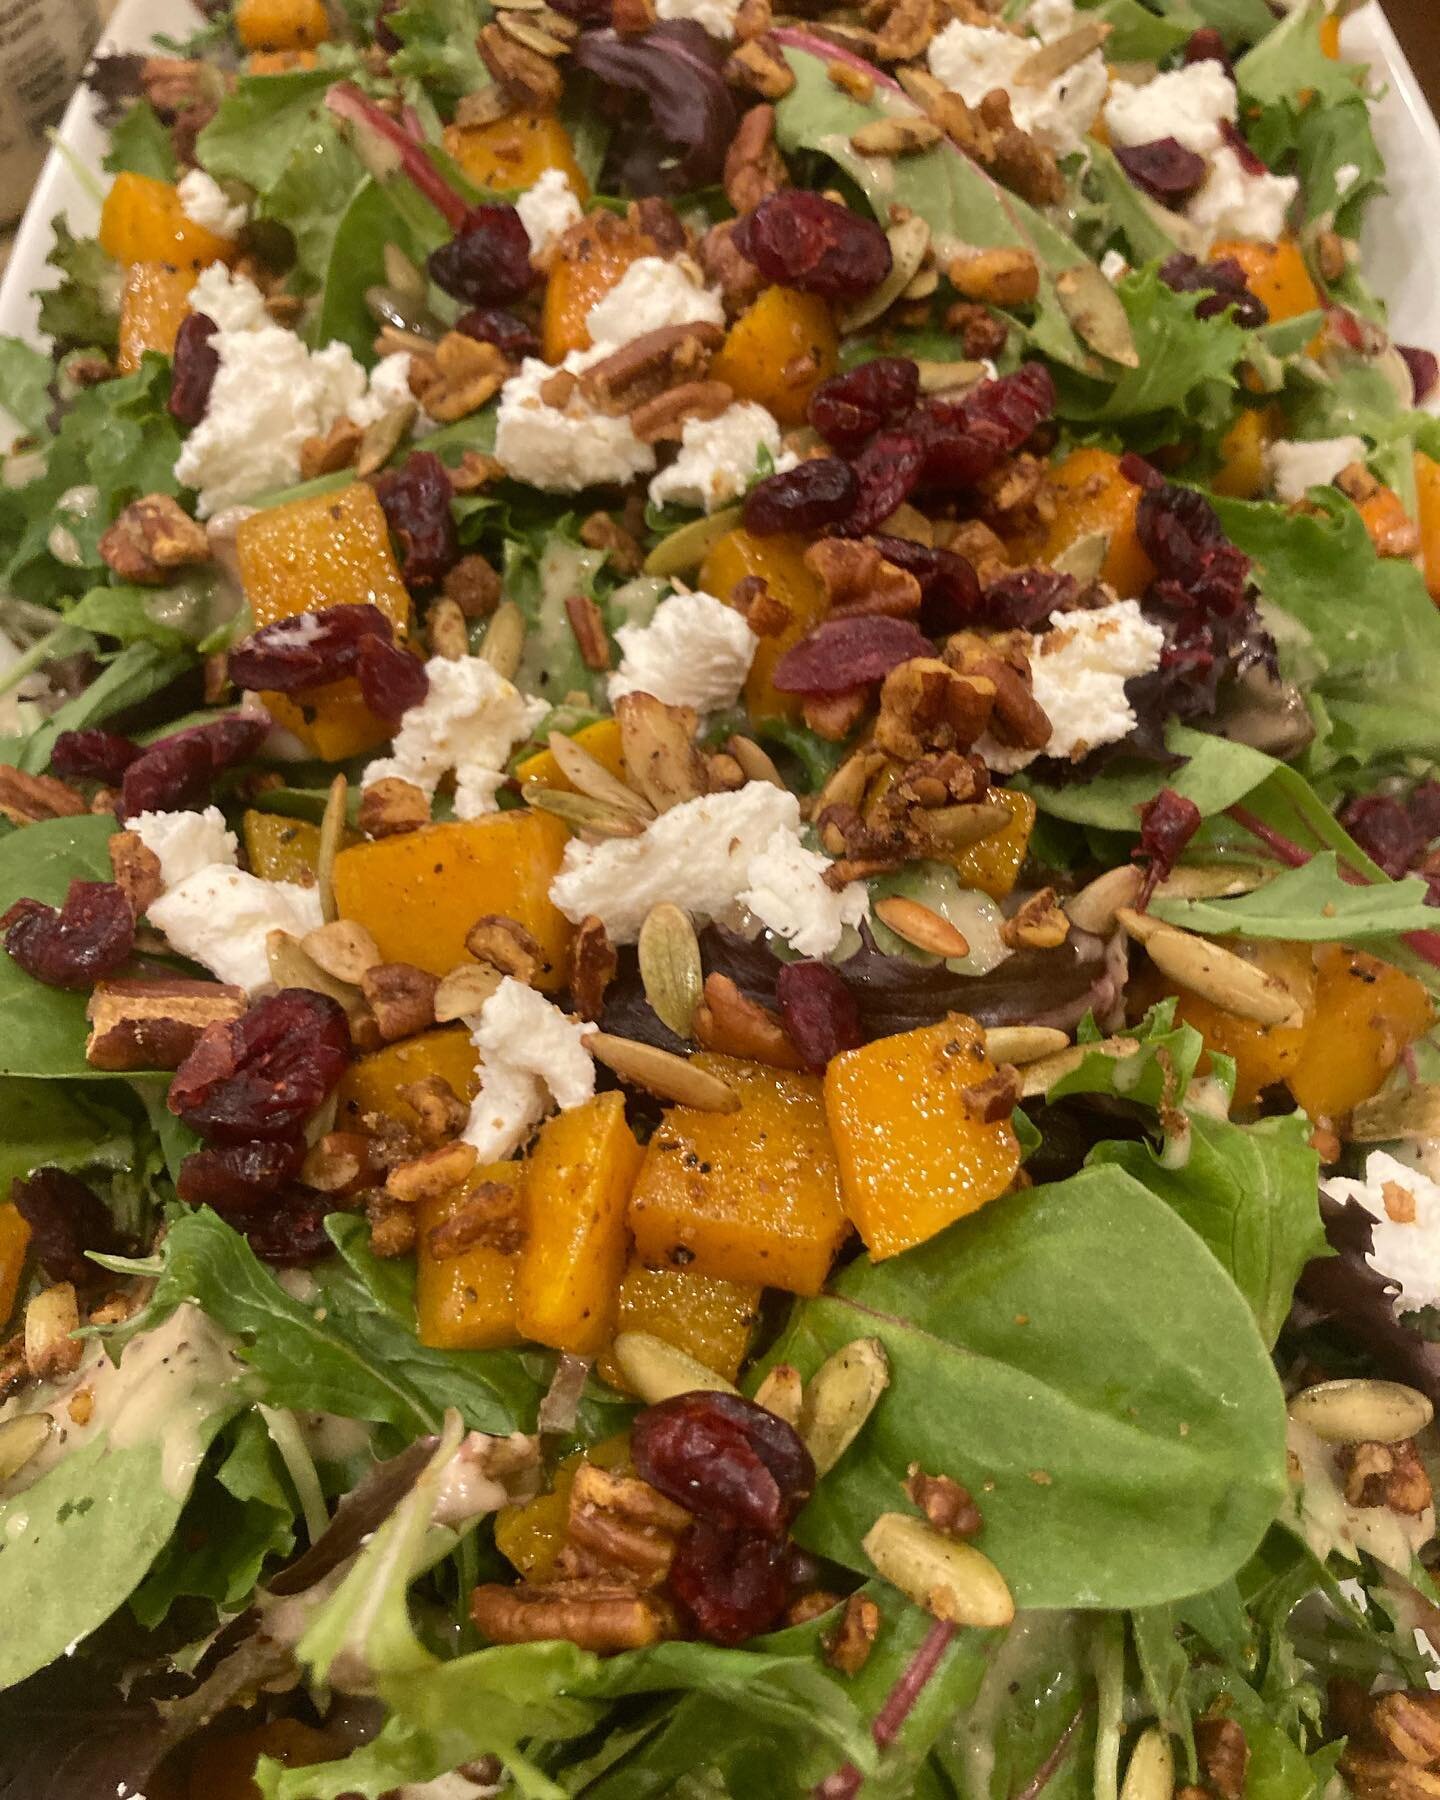 Looking for a fresh salad and a cool way to prepare Butternut Squash? Then look no further. Try my Pepitas Harvest Salad w/ Sherry Tarragon Vinaigrette. This recipe serves 8ppl. You can trim it down if need be. #personalchef #butternutsquash #pepita 